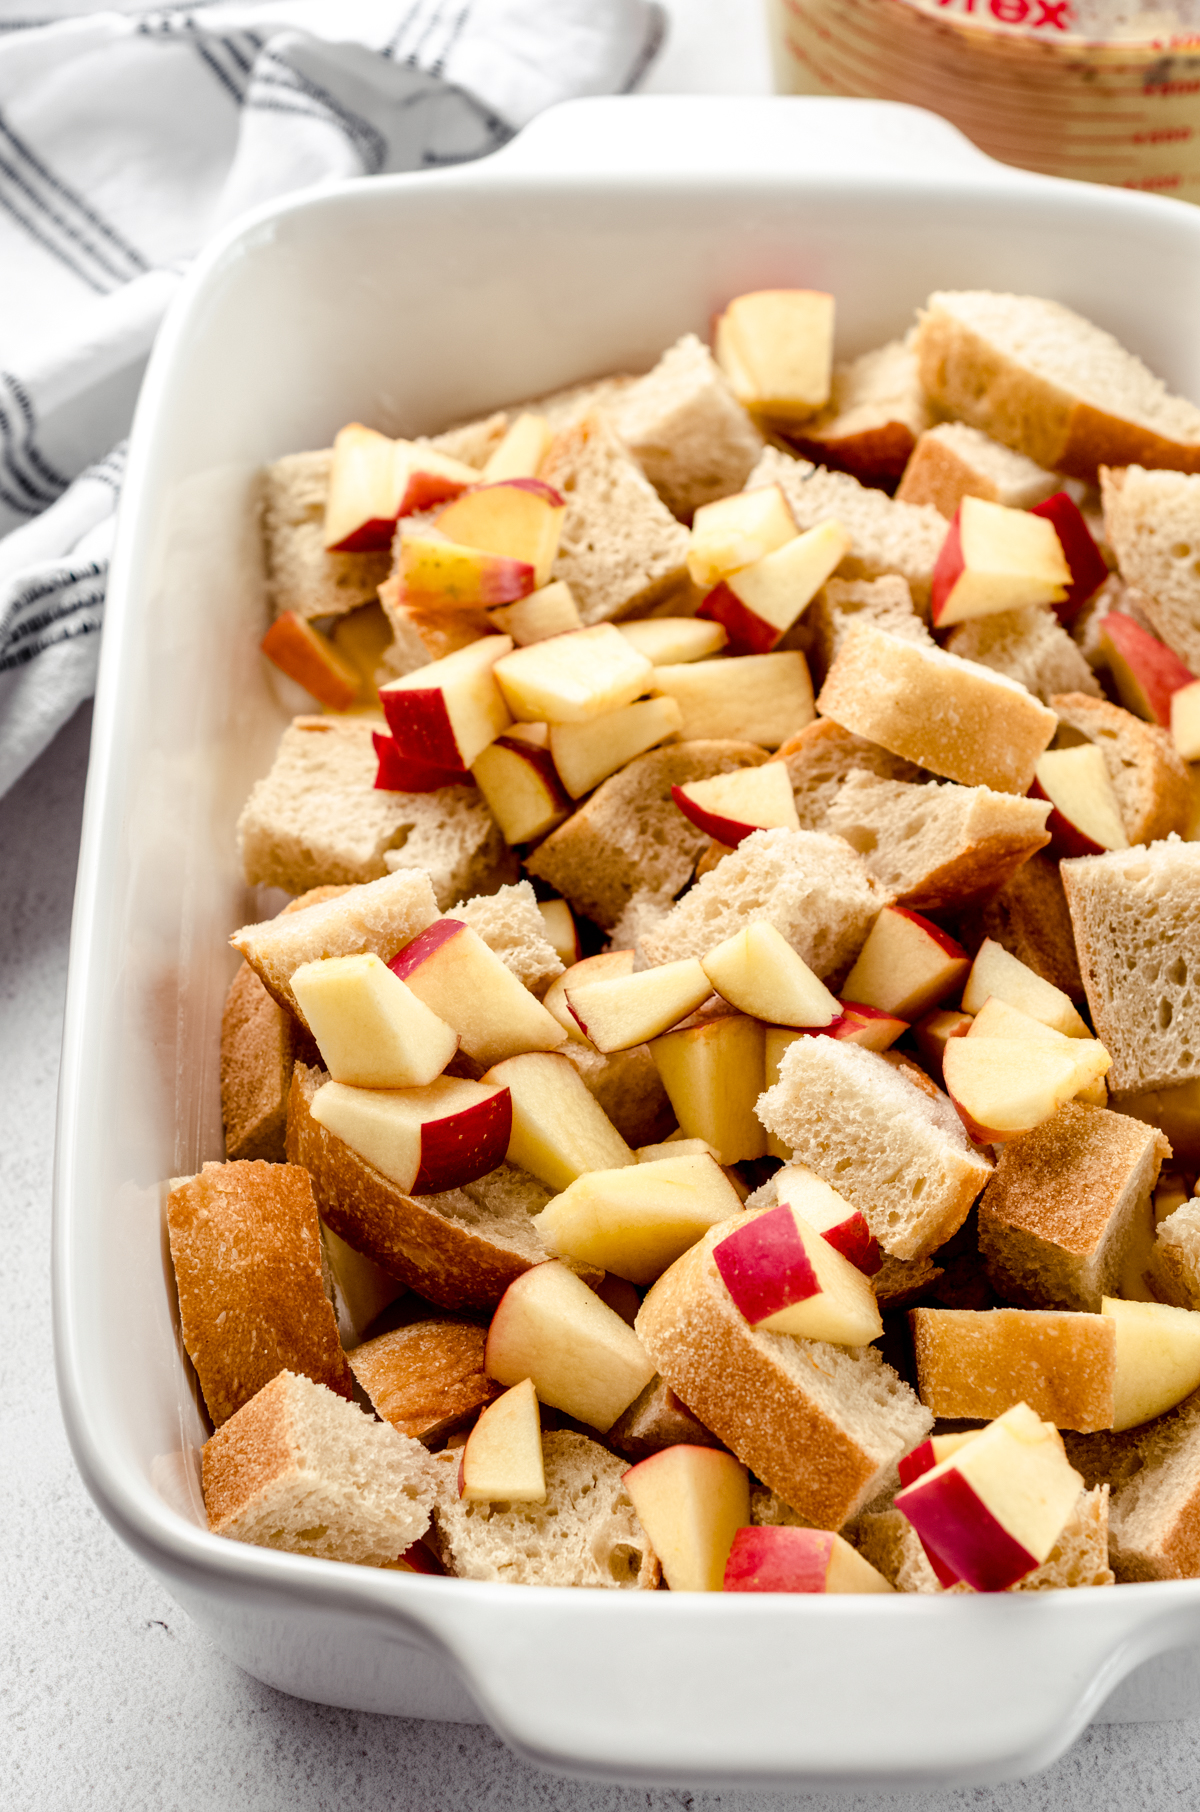 Apples and bread cubes in a casserole dish to make apple French toast casserole.